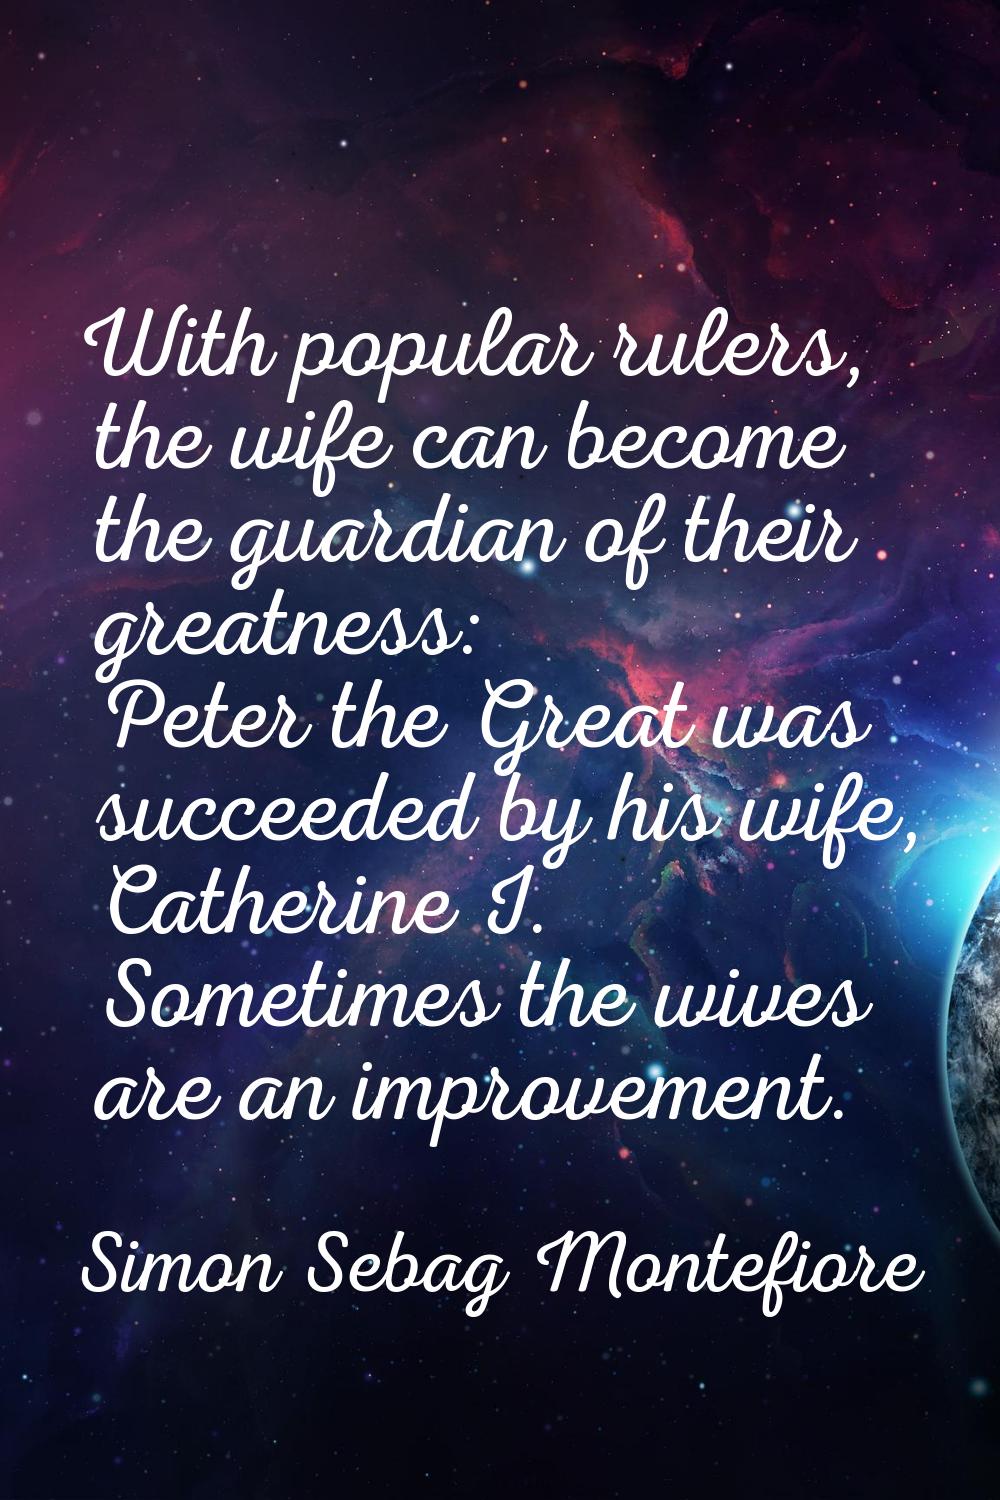 With popular rulers, the wife can become the guardian of their greatness: Peter the Great was succe